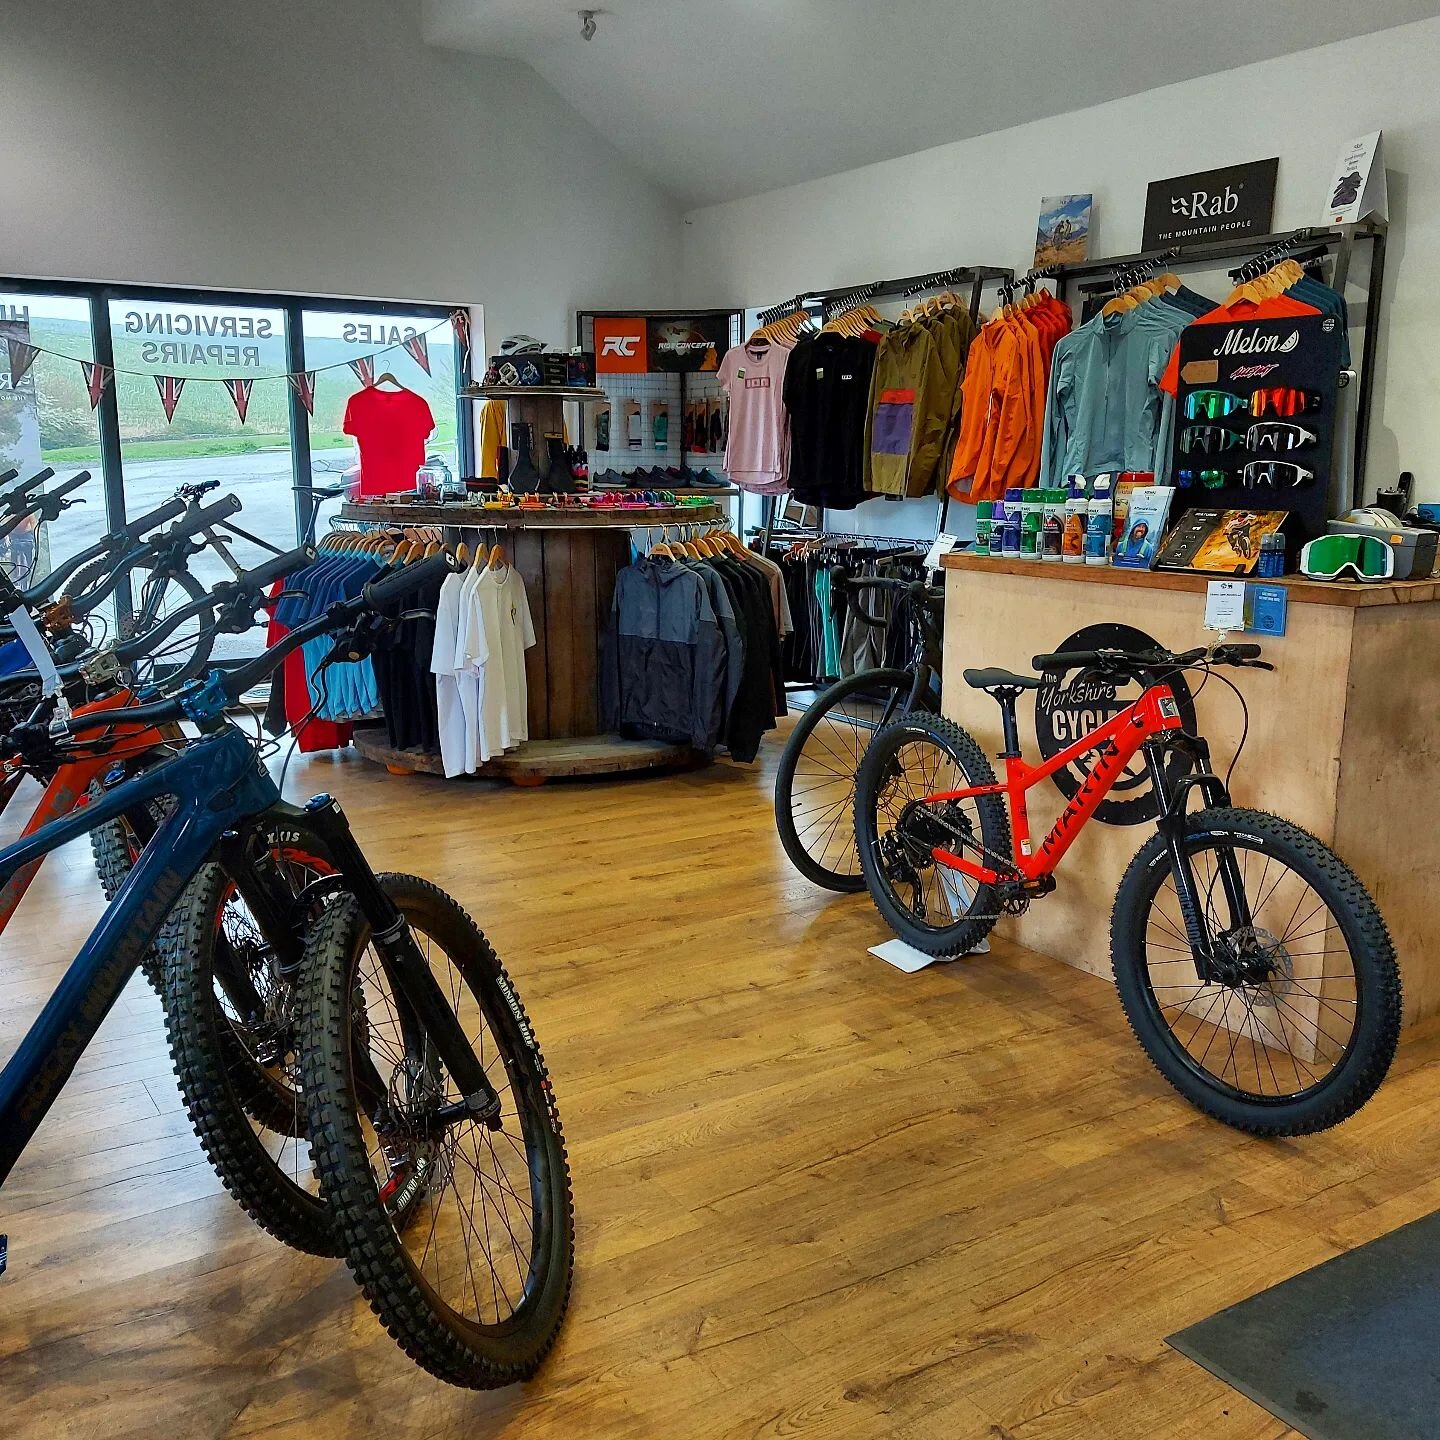 We are OPEN today!

(to 4pm in the cafe, 5pm bike shop)

Brand new Rab Equipment and ION Bike ridewear in stock.

Rocky Mountain and Marin bikes.

Plus upto 50% off Fox Racing and more!

Come see us or visit online!

www.yorkshirecyclehub.uk

01287 6